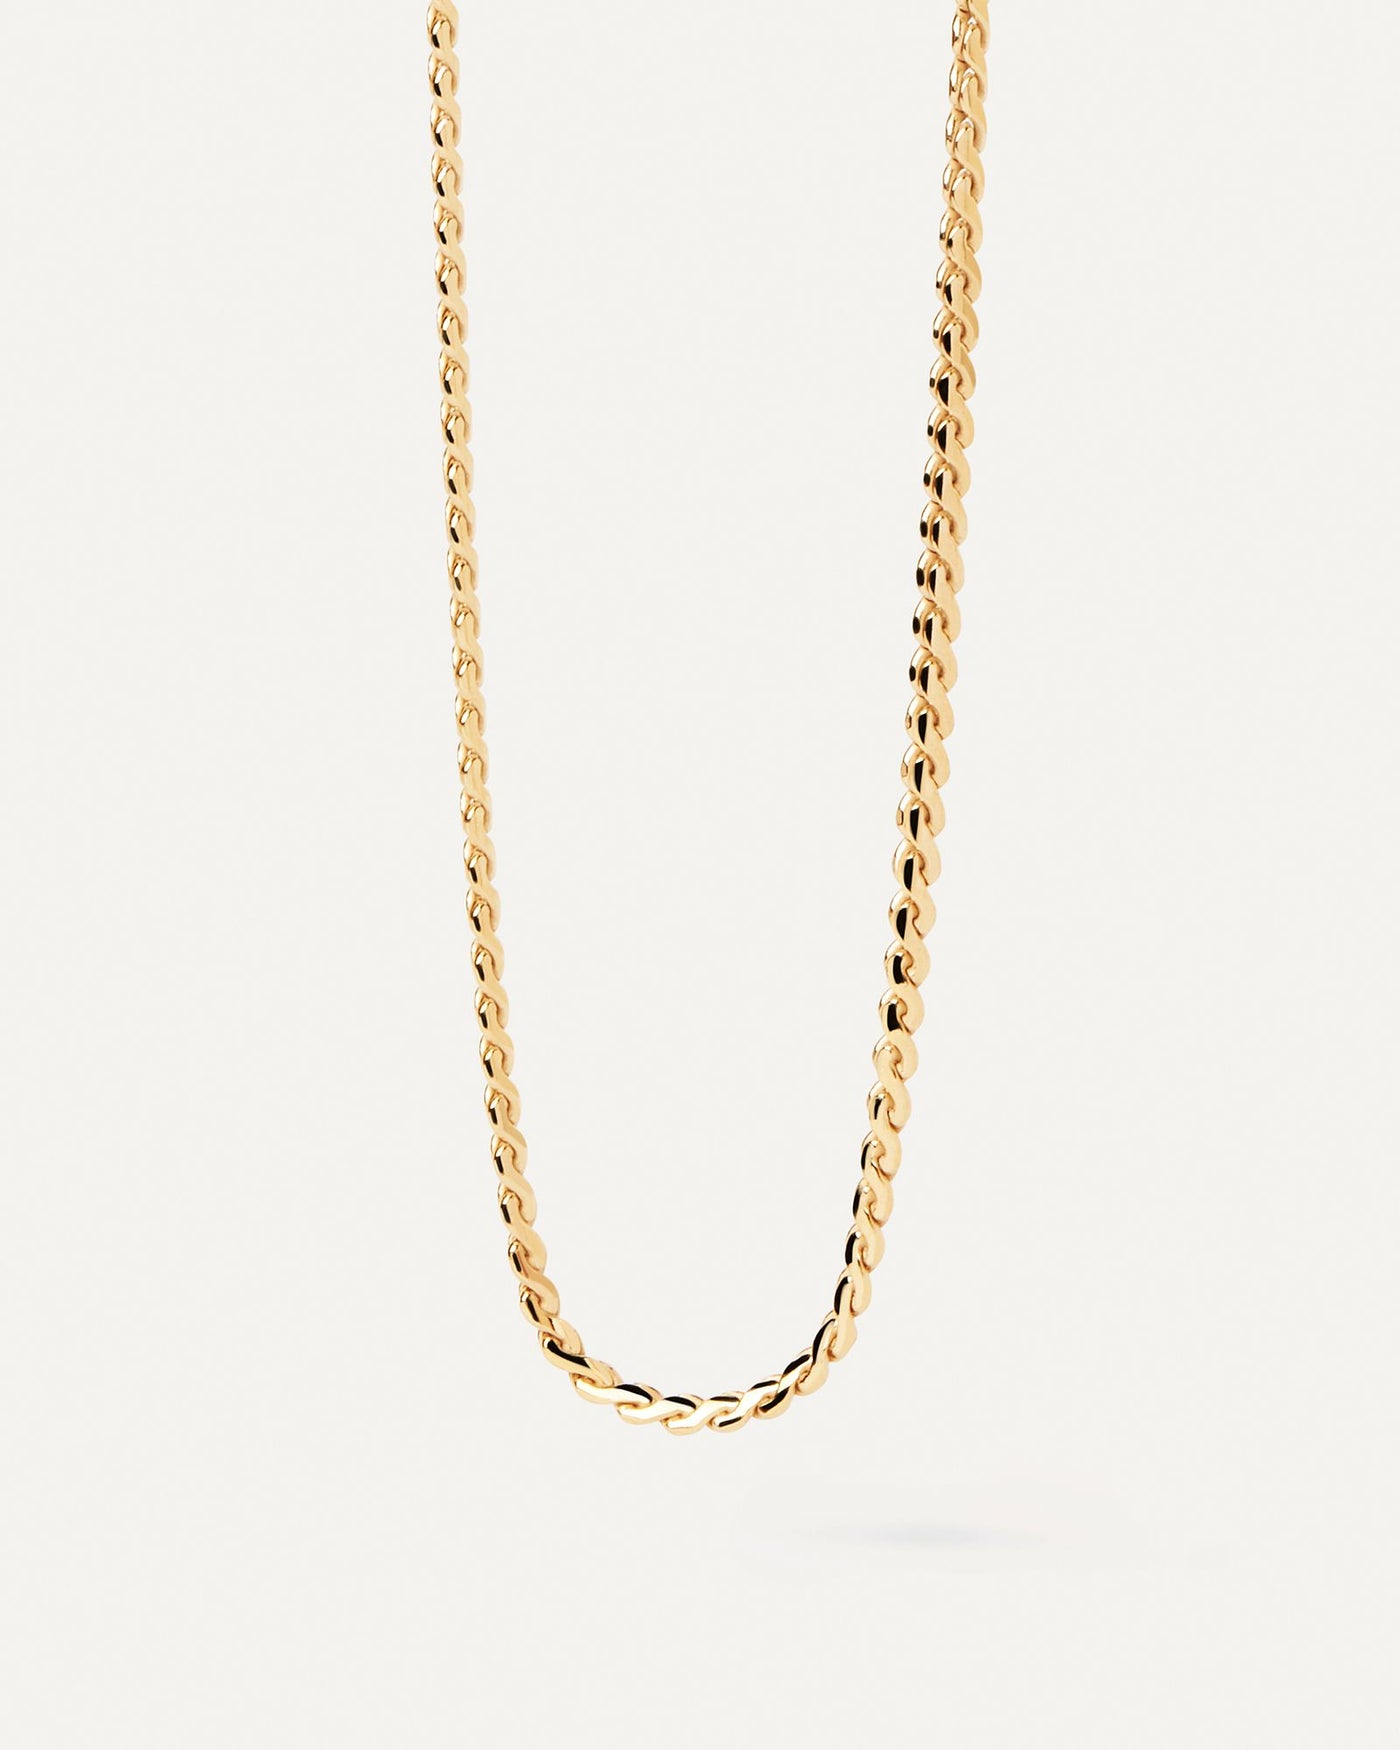 2024 Selection | Serpentine Chain Necklace. Modern gold-plated serpentine chain necklace with braided links. Get the latest arrival from PDPAOLA. Place your order safely and get this Best Seller. Free Shipping.